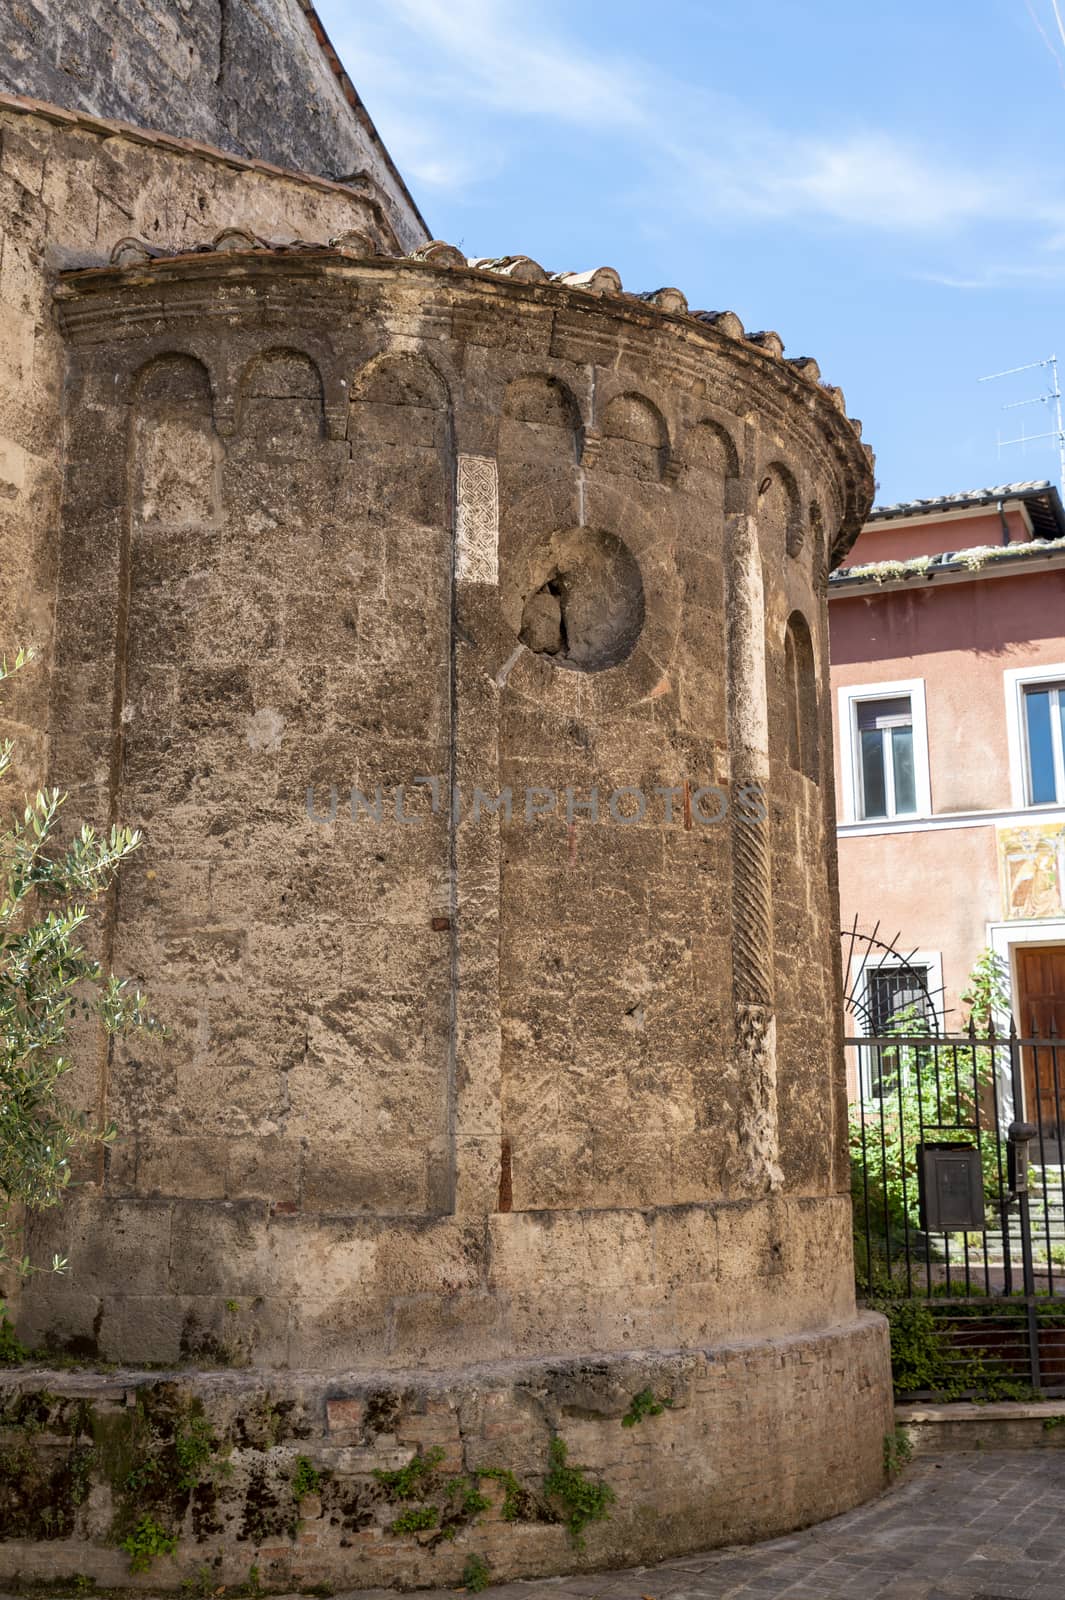 terni,italy june 12 2020 :architecture of the historical part of terni in the cathedral area